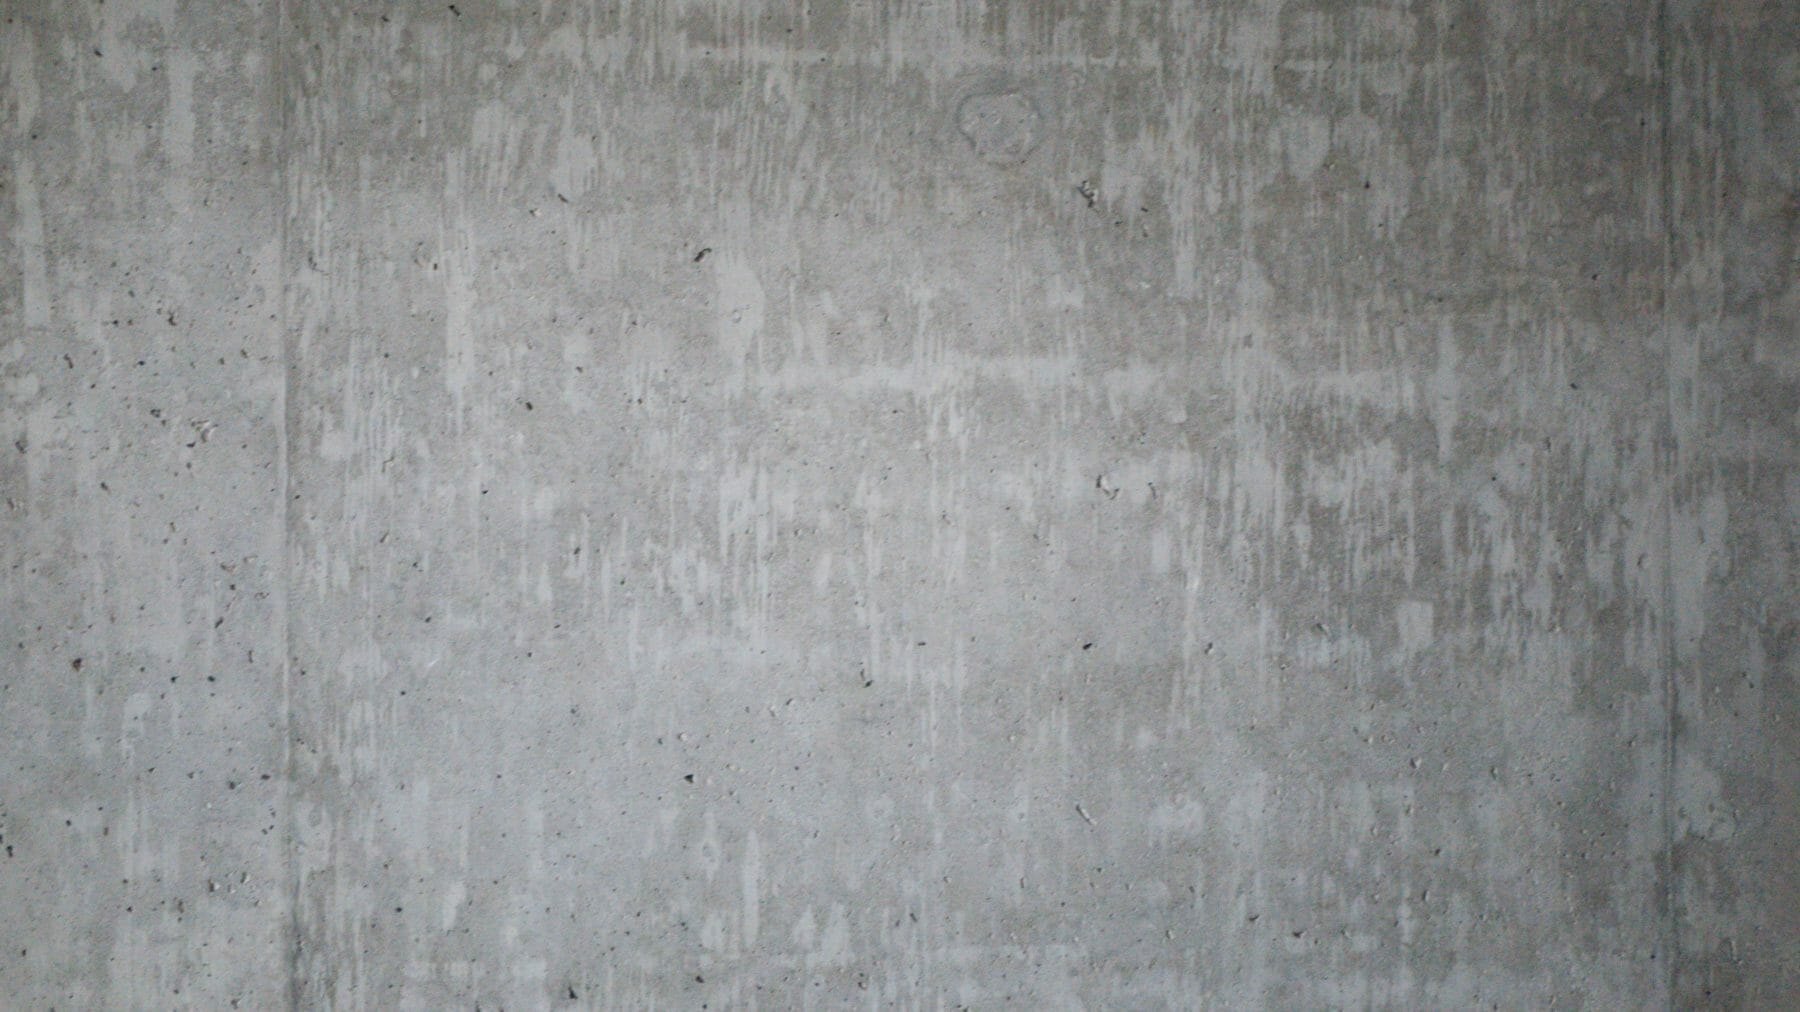 6 Different Types of Concrete Stains and How You Can Effectively Remove Them